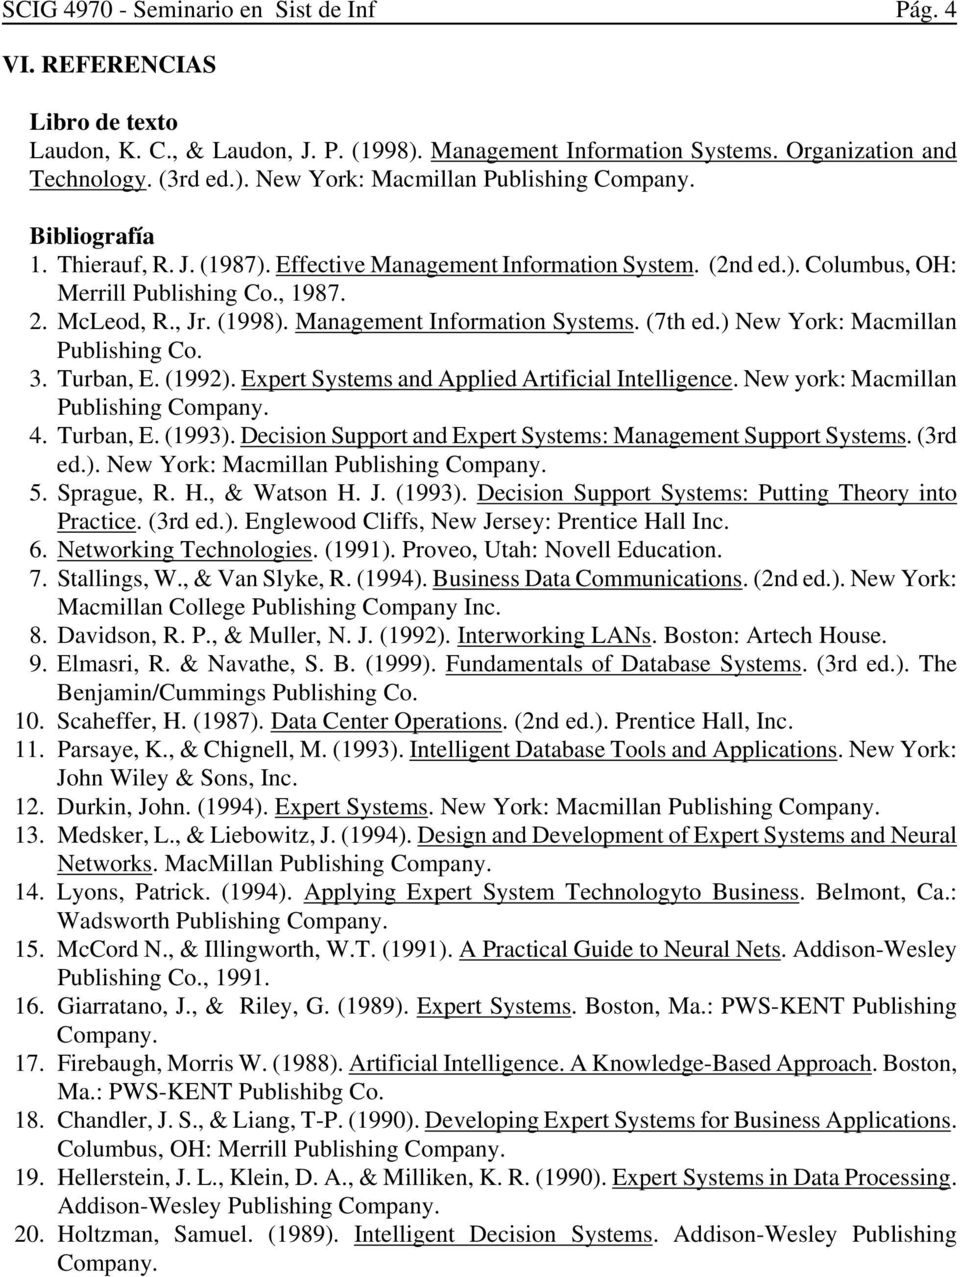 (7th ed.) New York: Macmillan Publishing Co. 3. Turban, E. (1992). Expert Systems and Applied Artificial Intelligence. New york: Macmillan Publishing Company. 4. Turban, E. (1993).